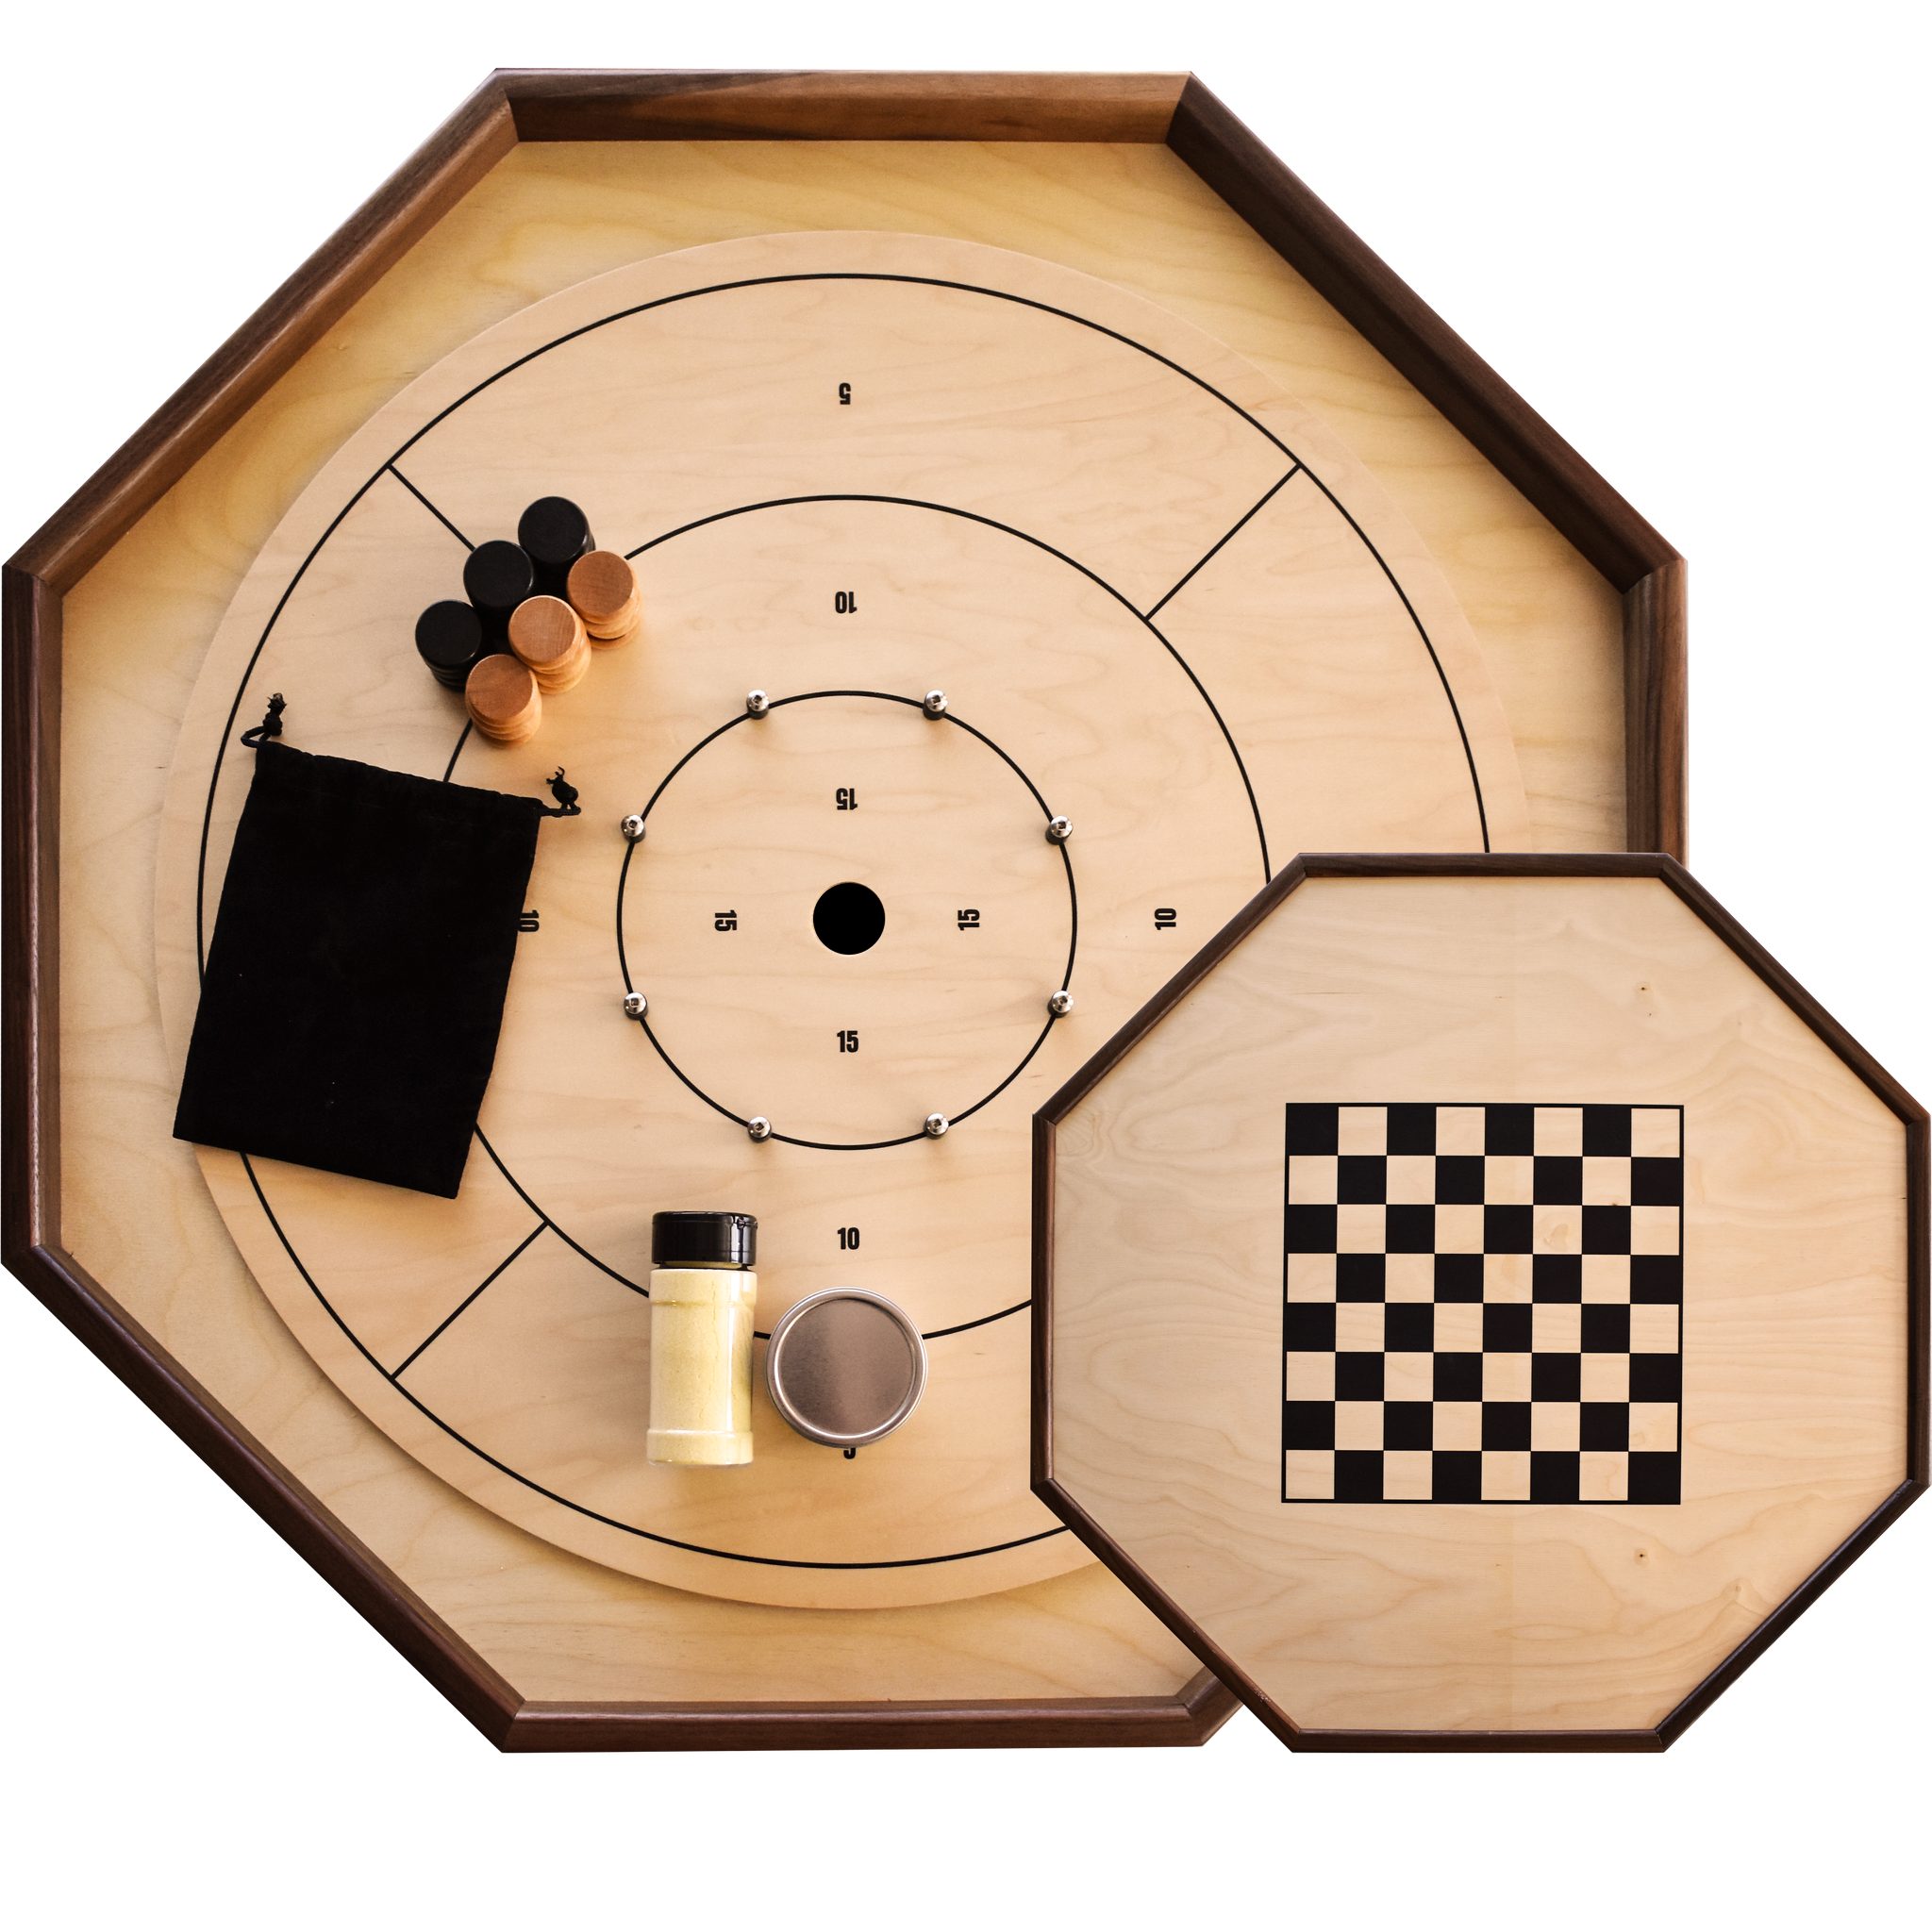 4 In 1 Wooden Crokinole Set With Playing Cards